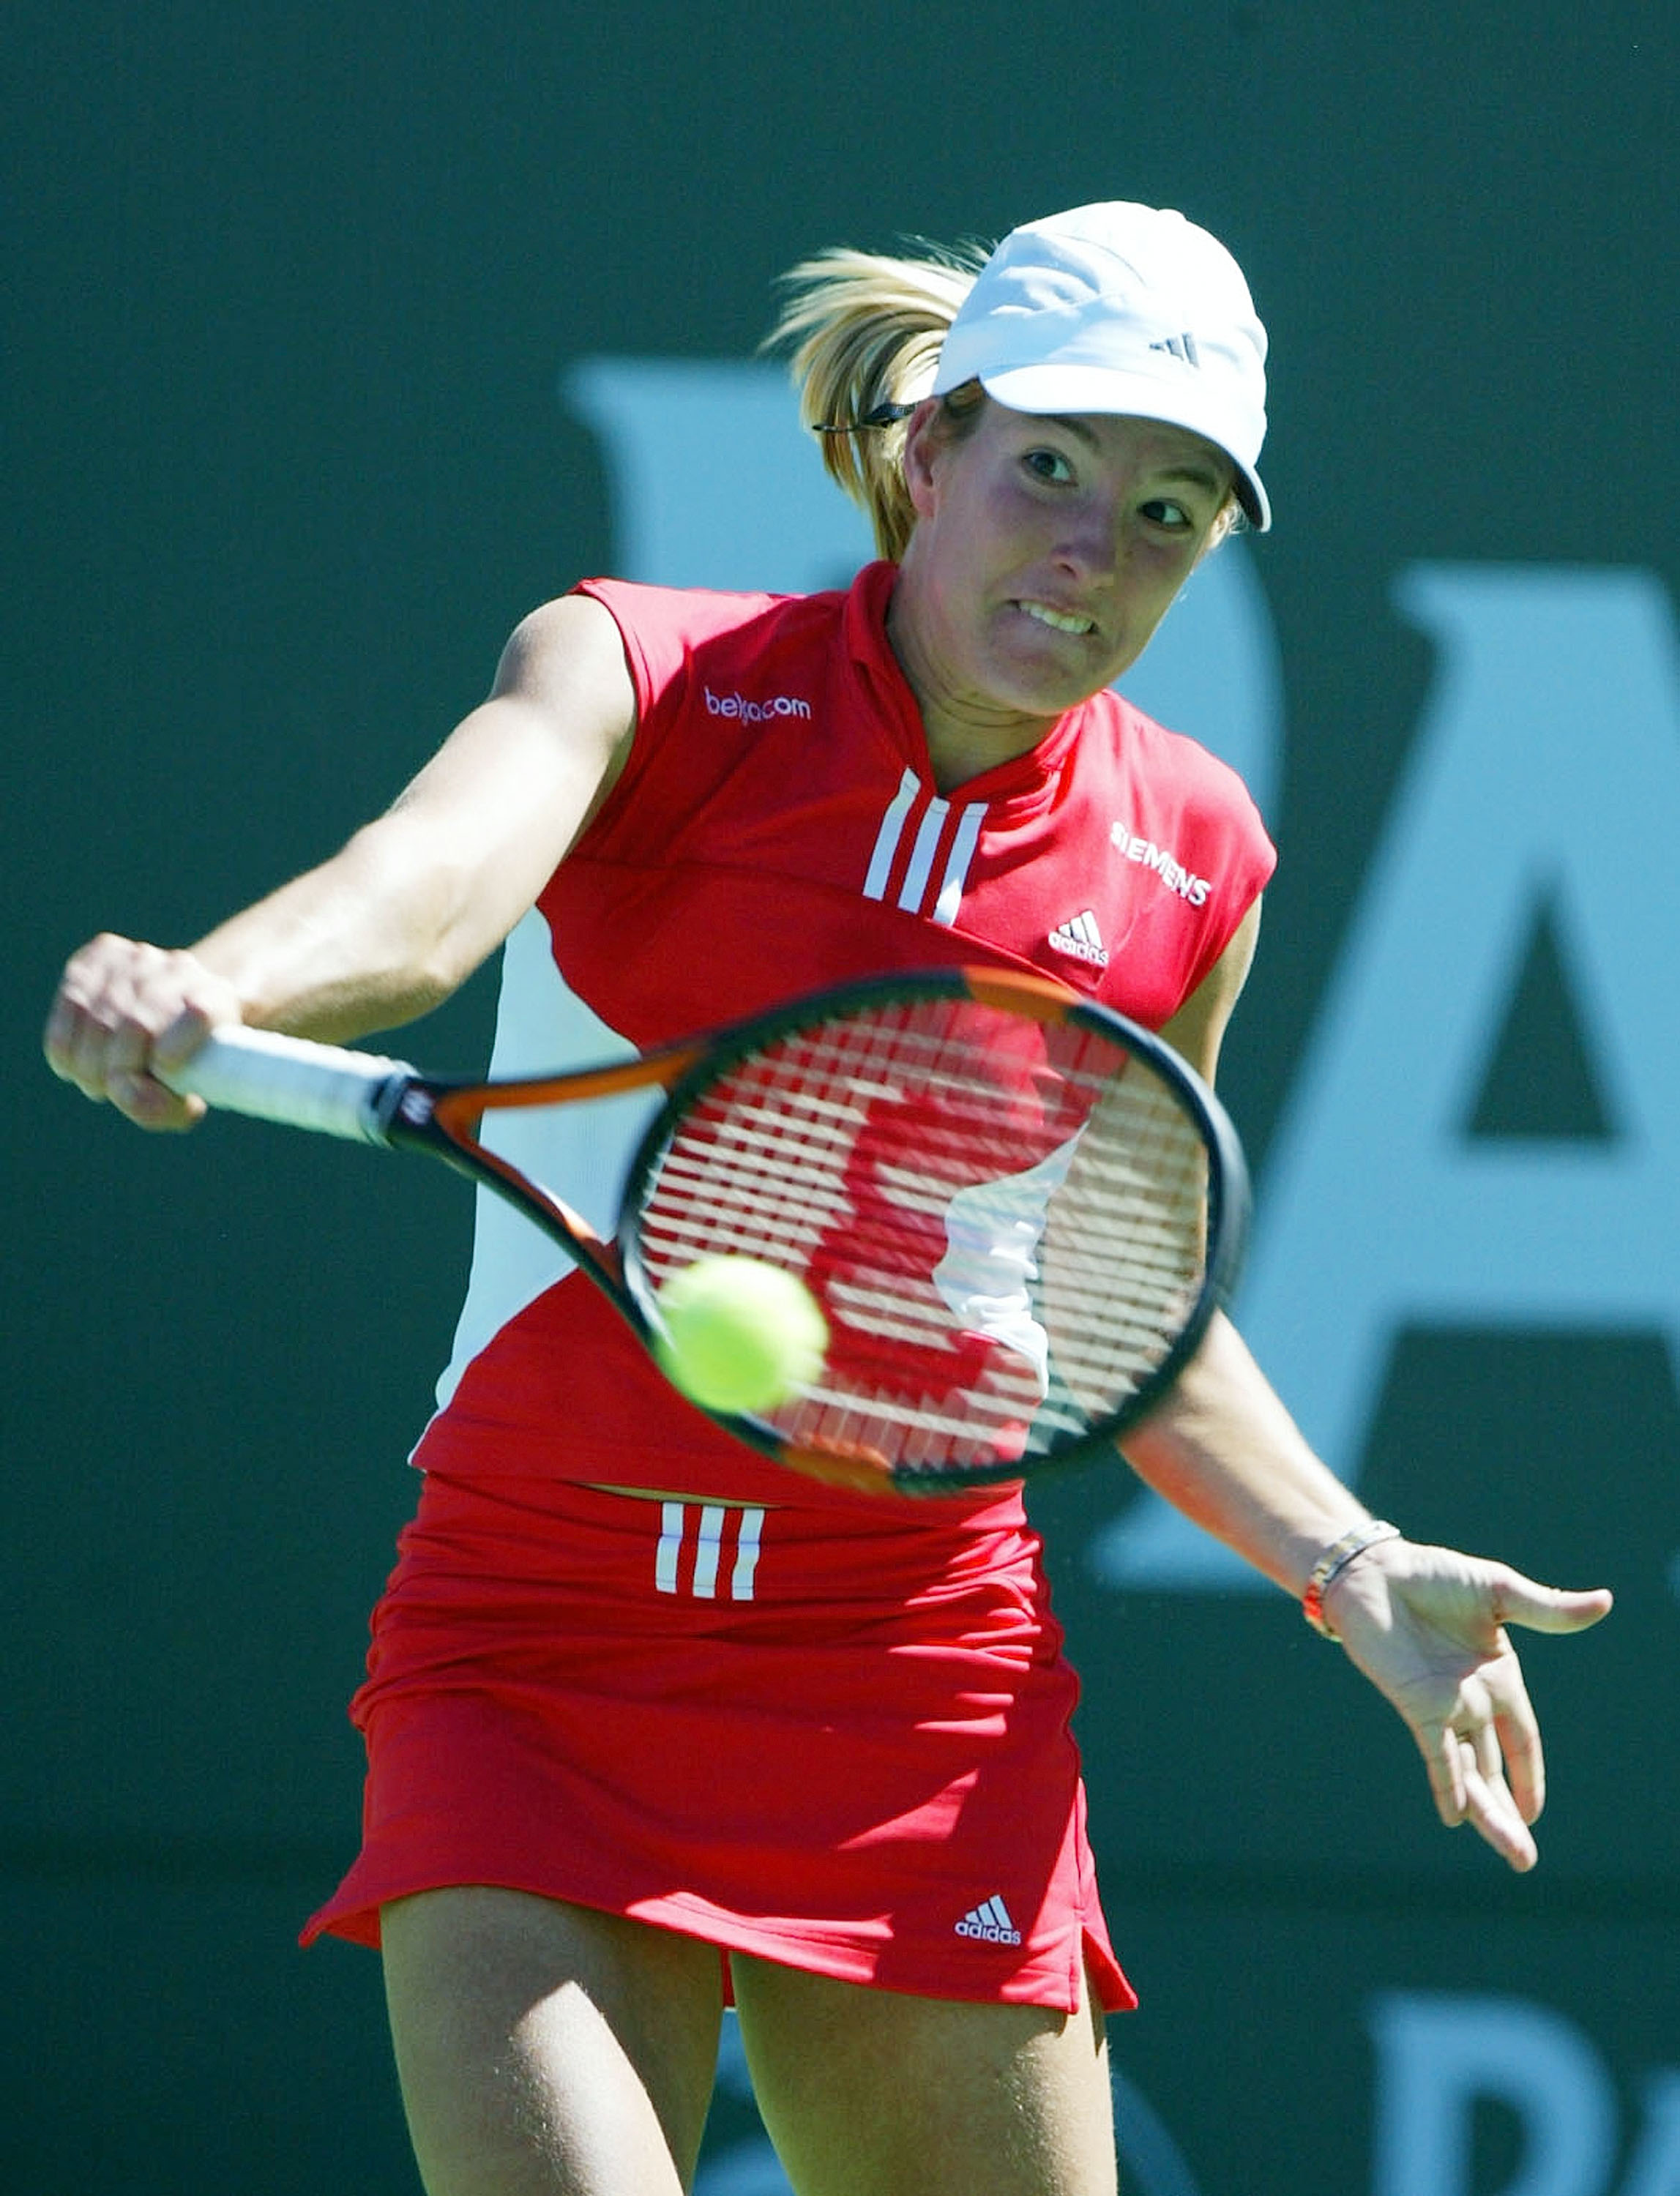 INDIAN WELLS, CA - MARCH 21:  Justine Henin-Hardenne of Belgium returns the ball before defeating Lindsay Davenport of the U.S. during the Women's Final match by a score of 6-1, 6-4 at the Pacific Life Open on March 21, 2004 at the Indian Wells Tennis Gar